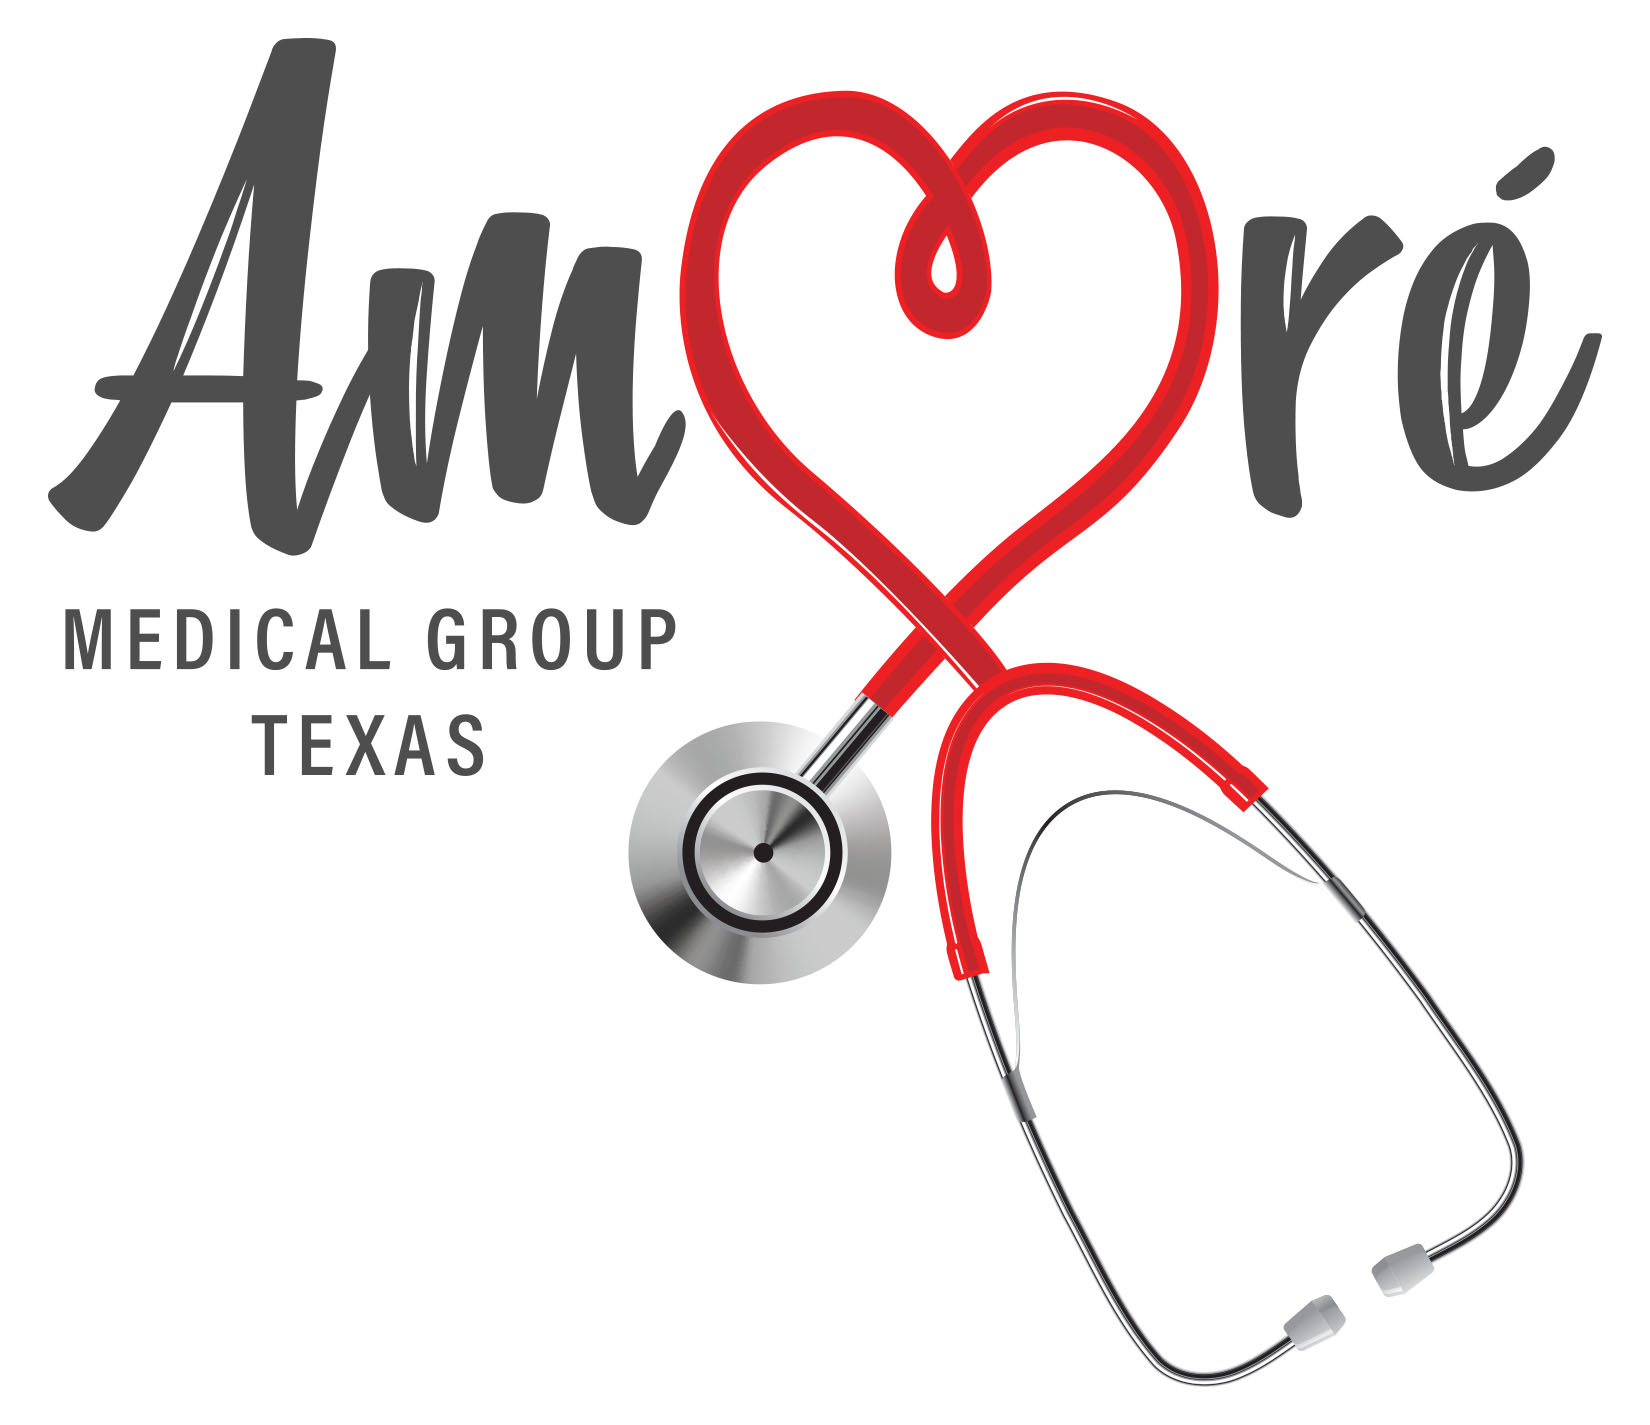 Amore Medical Group